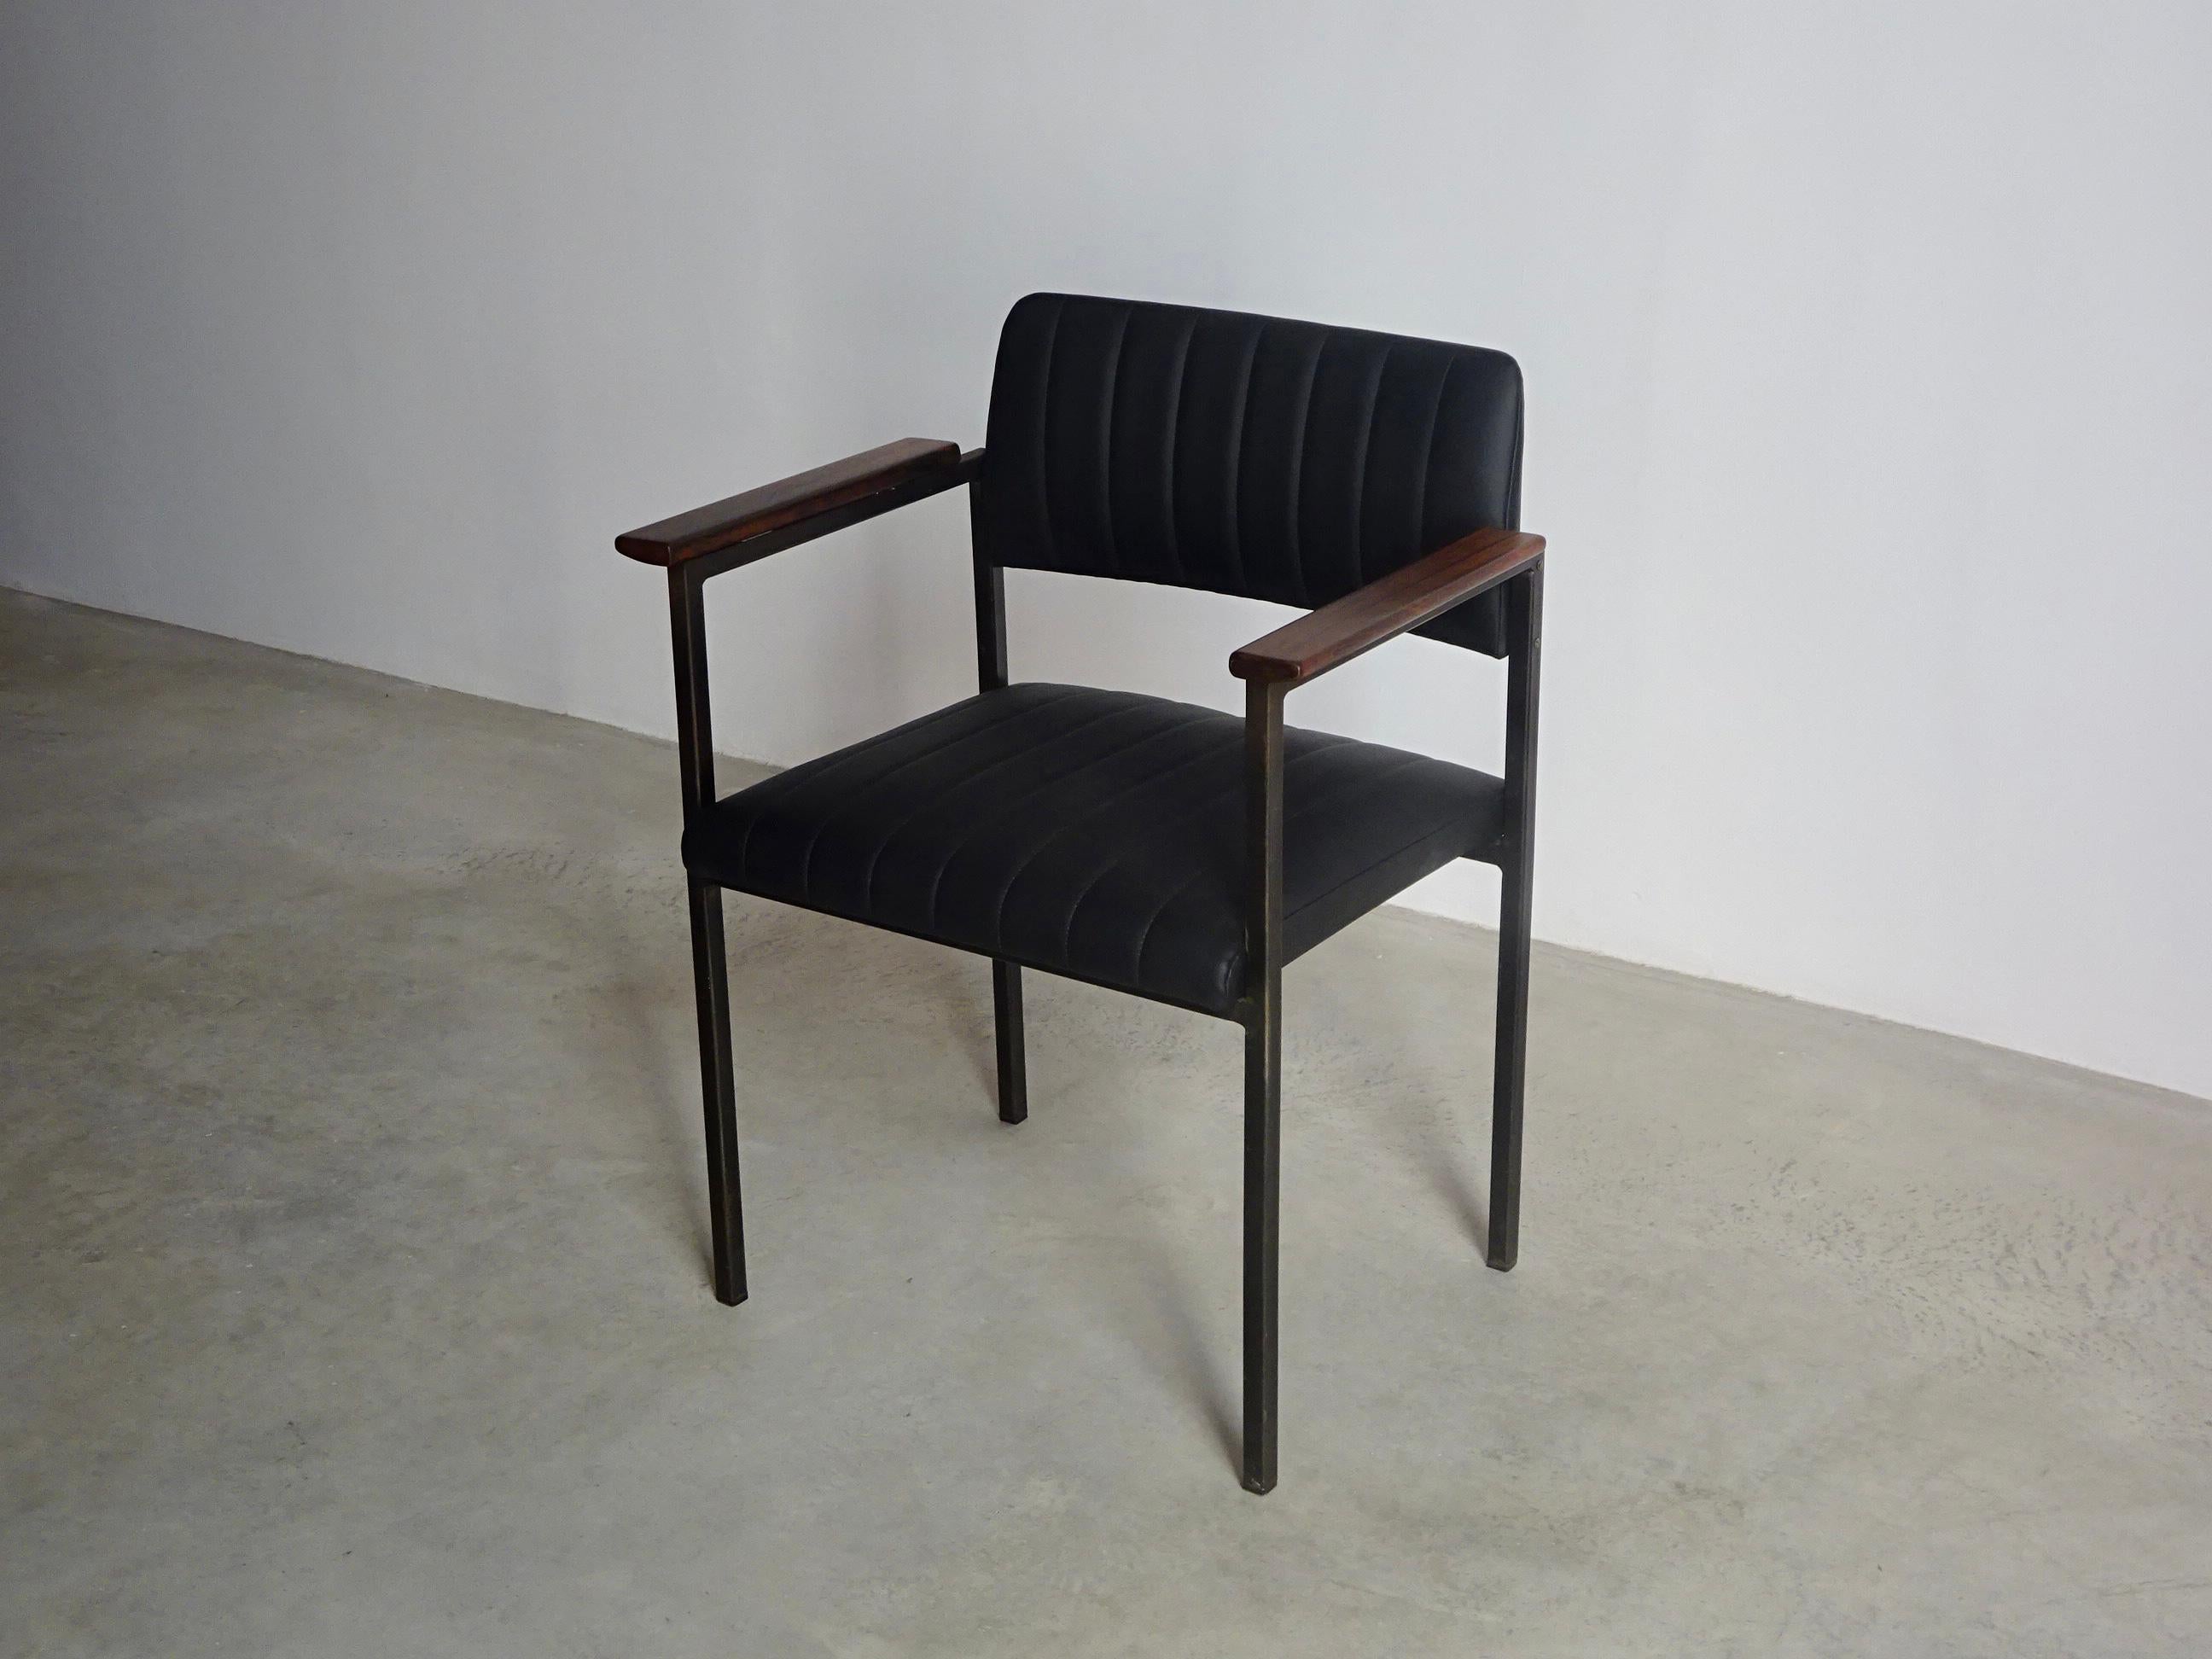 Armchair designed by Sérgio Rodrigues in iron structure, solid wood arms and new black leather upholstery. Brazil, 1950.